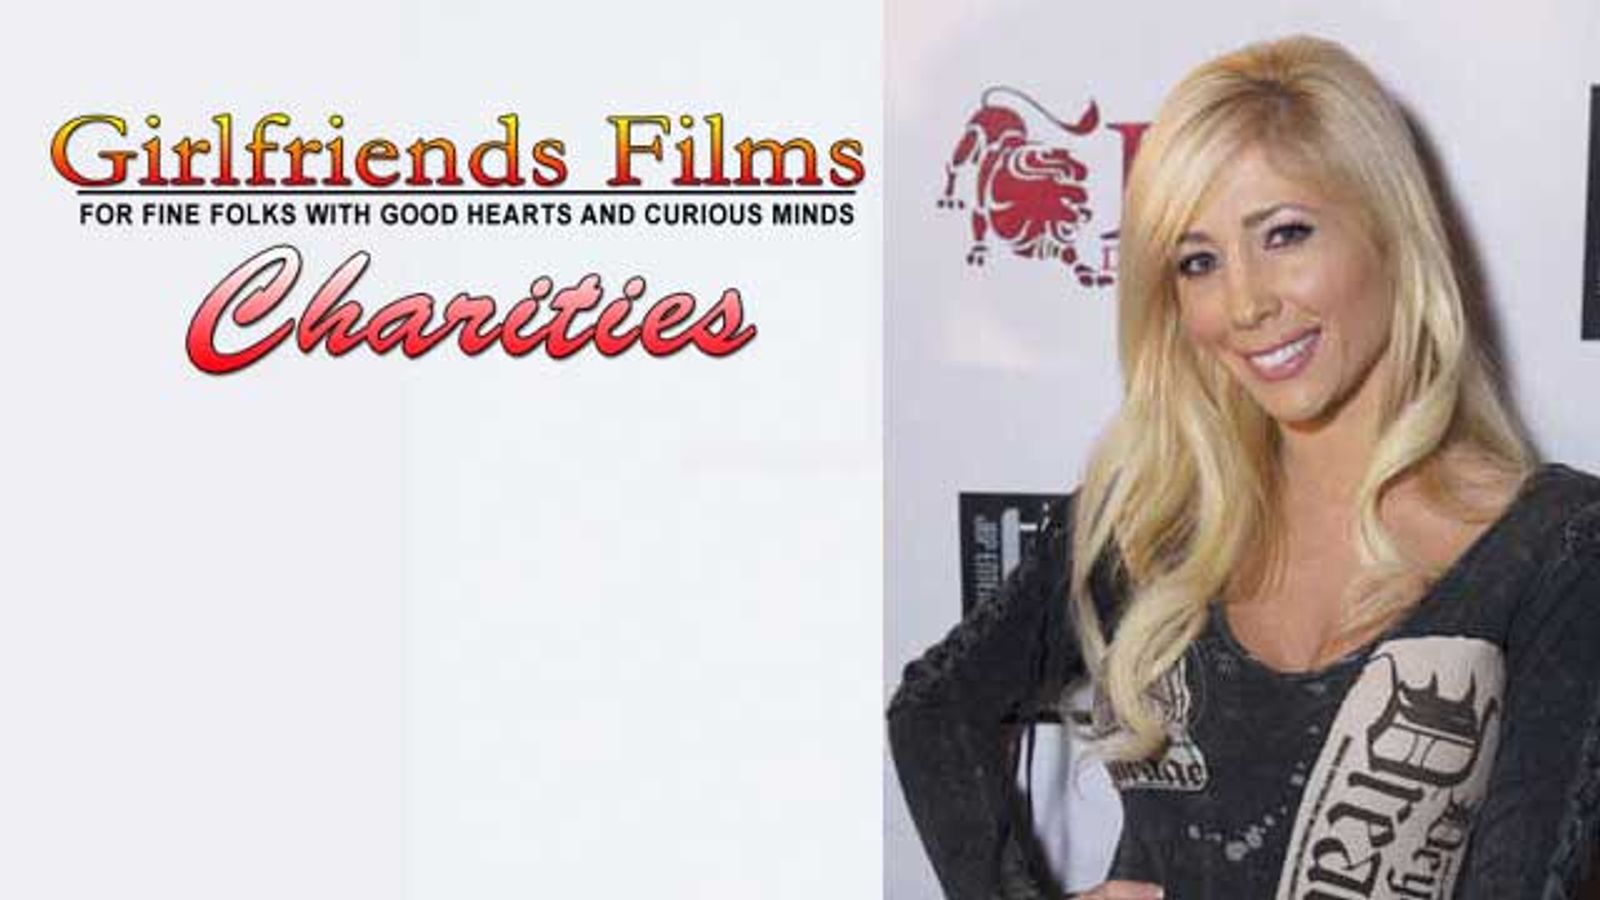 Tasha Reign Selects CancerCare as Girlfriends Films’ Aug. Charity